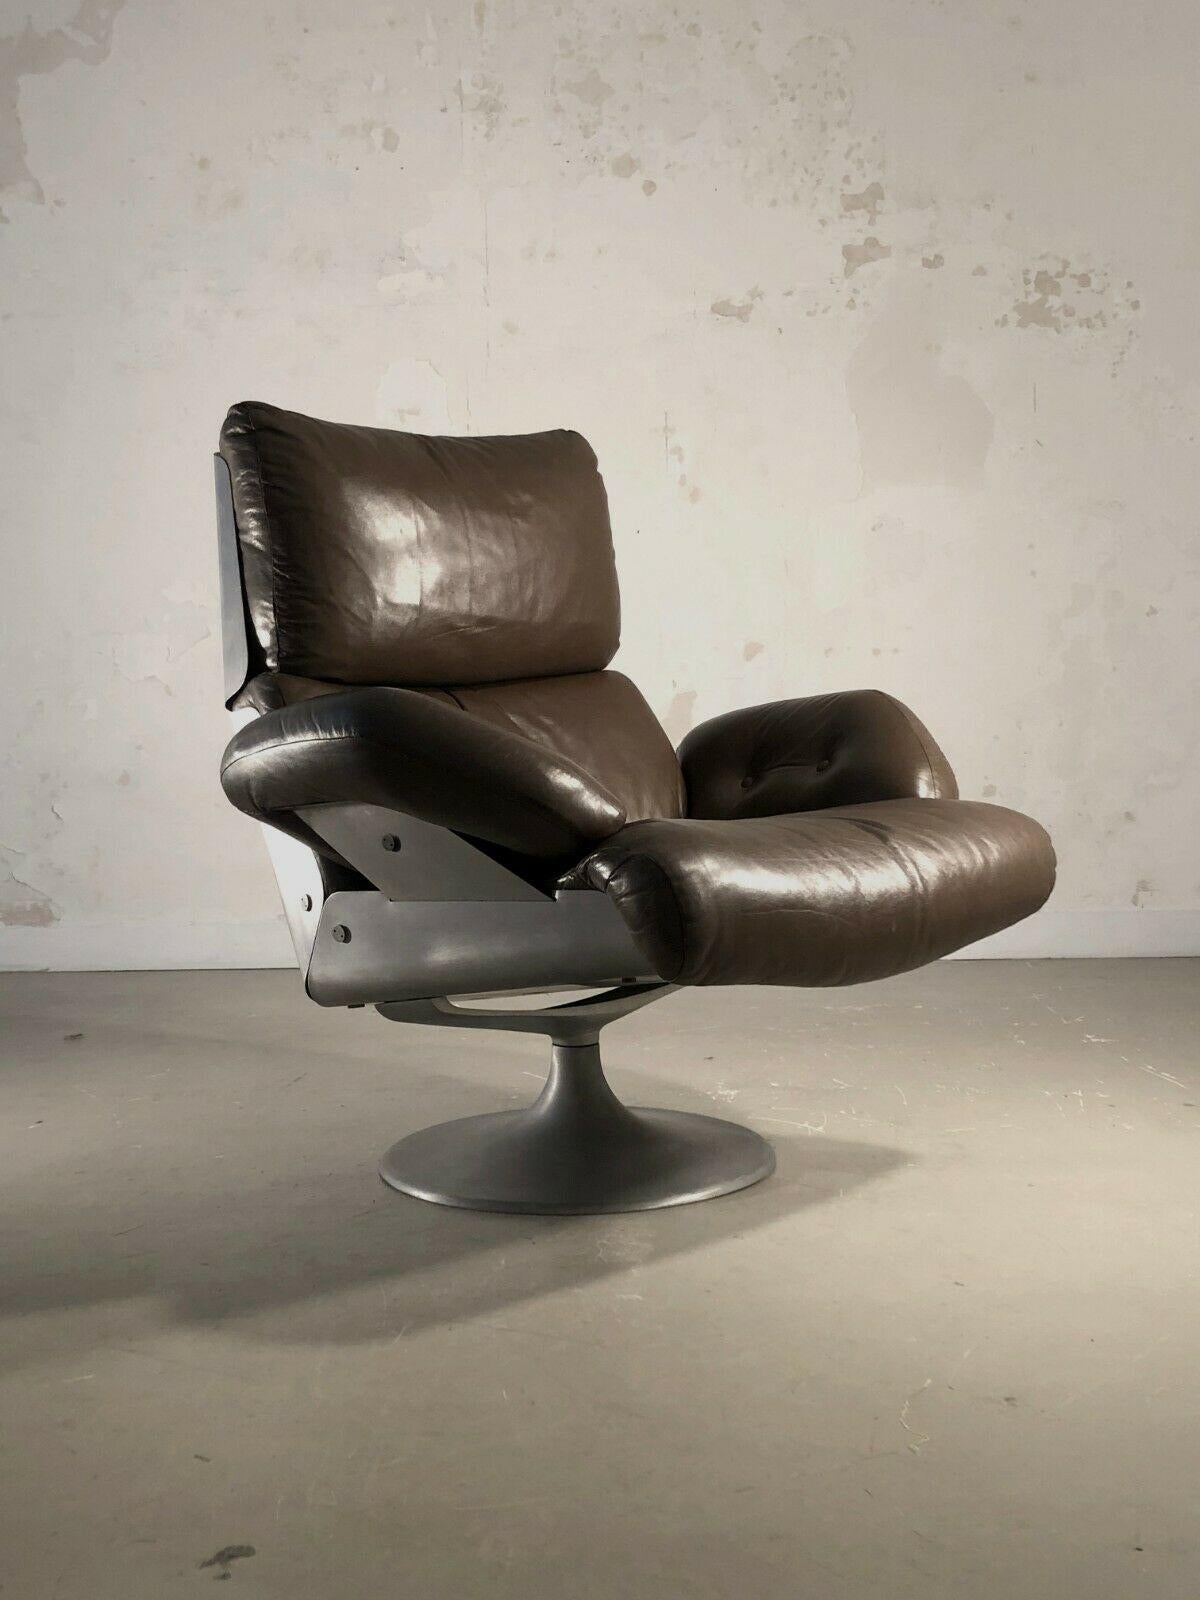 Late 20th Century A RADICAL POST-MODERN ARMCHAIR LOUNGE CHAIR & OTTOMAN By XAVIER FEAL France 1970 For Sale